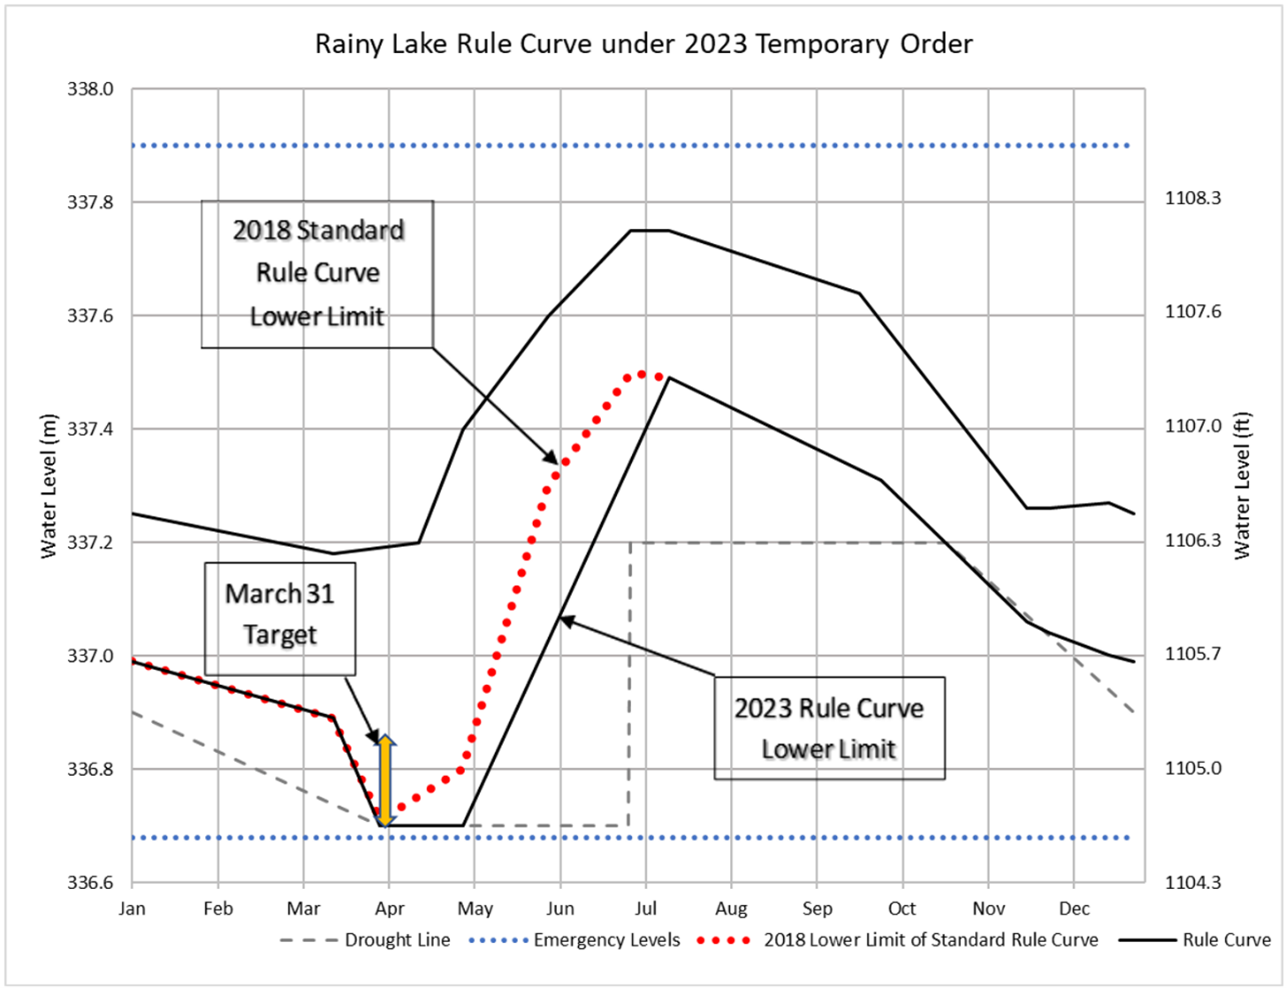 Graphic showing Rainy Lake Rule Curve under 2023 Temporary Order